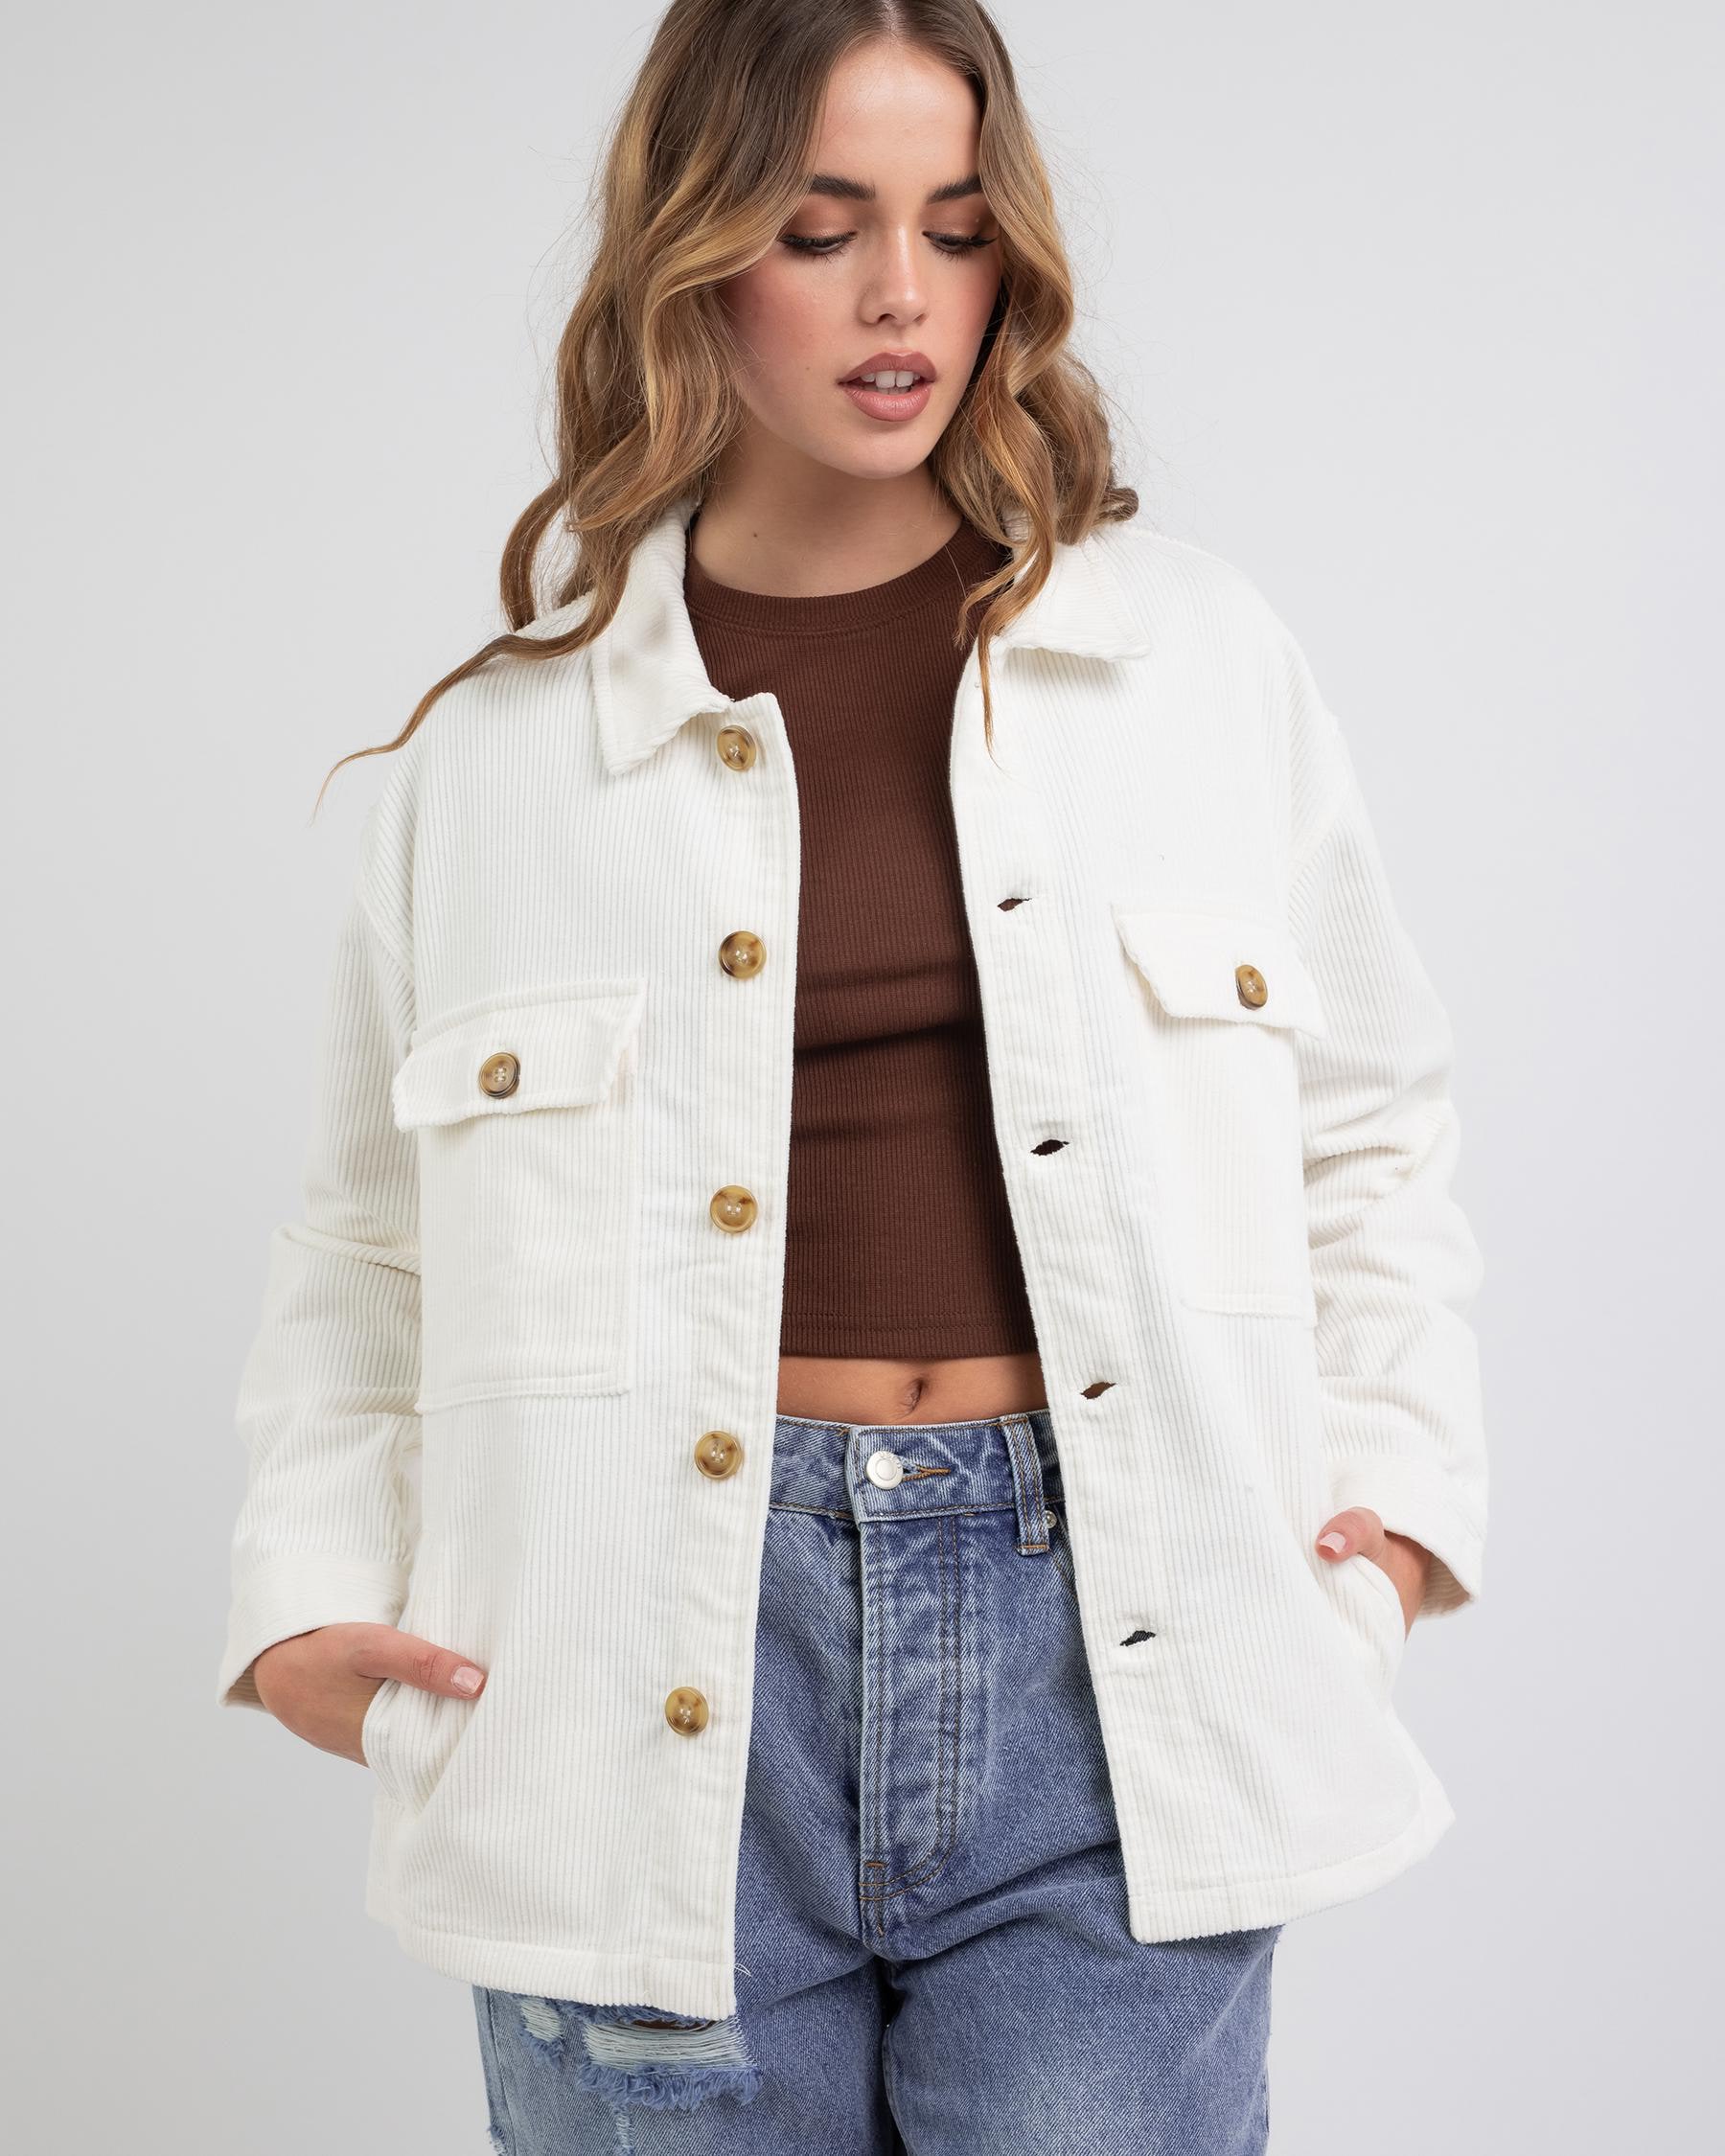 Wits The Label Freya Shacket In White - Fast Shipping & Easy Returns ...